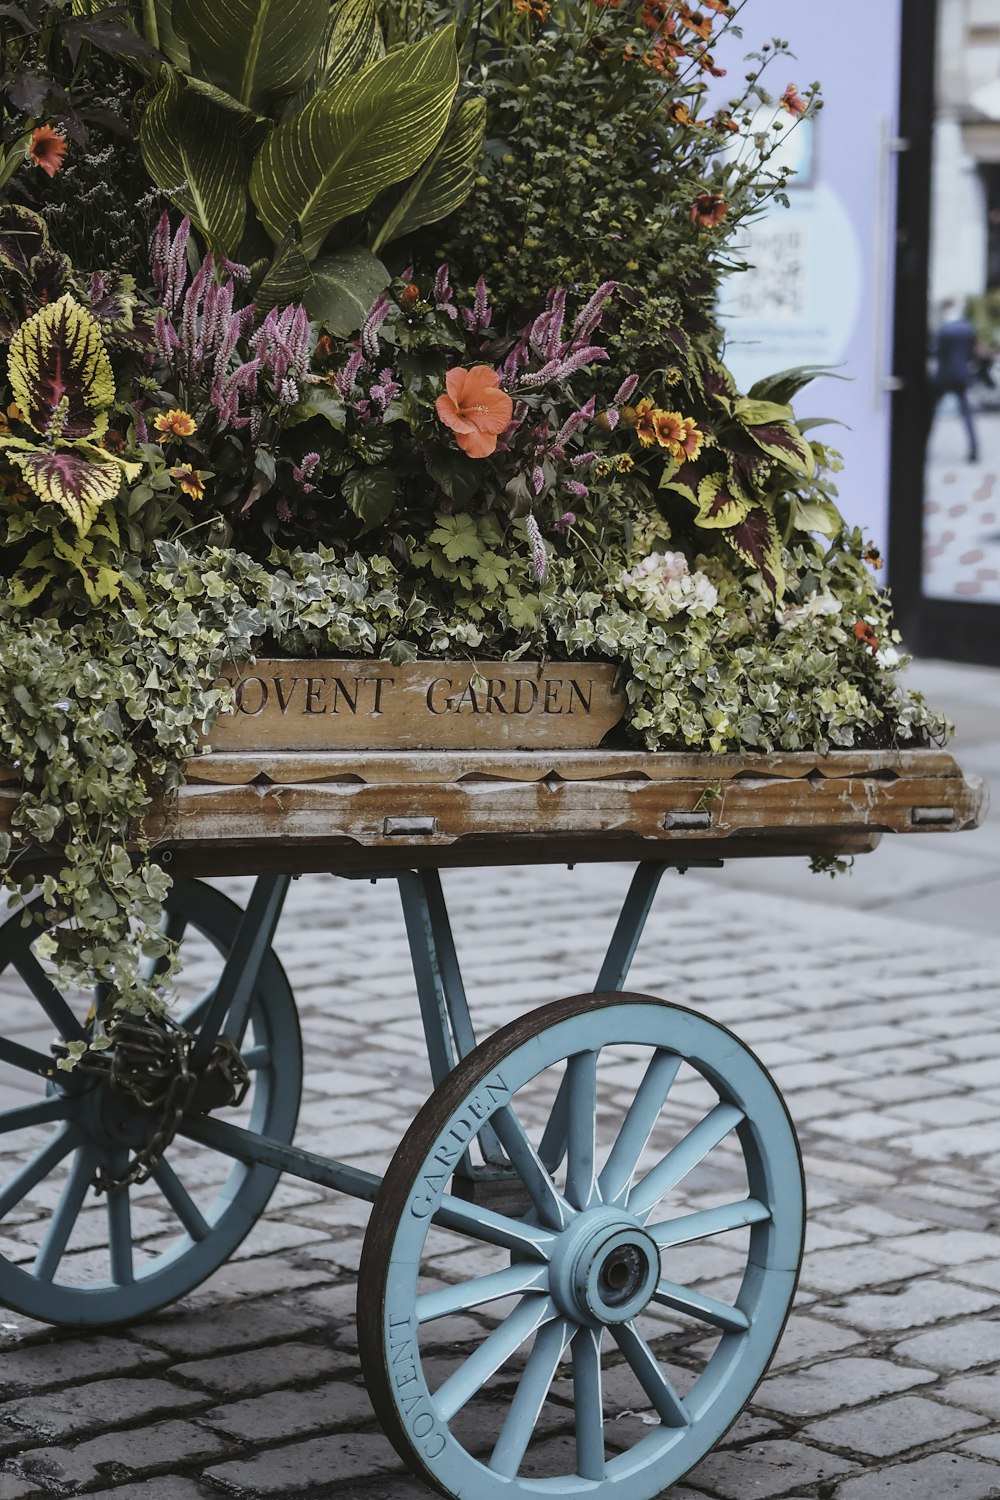 a wooden wagon filled with lots of flowers